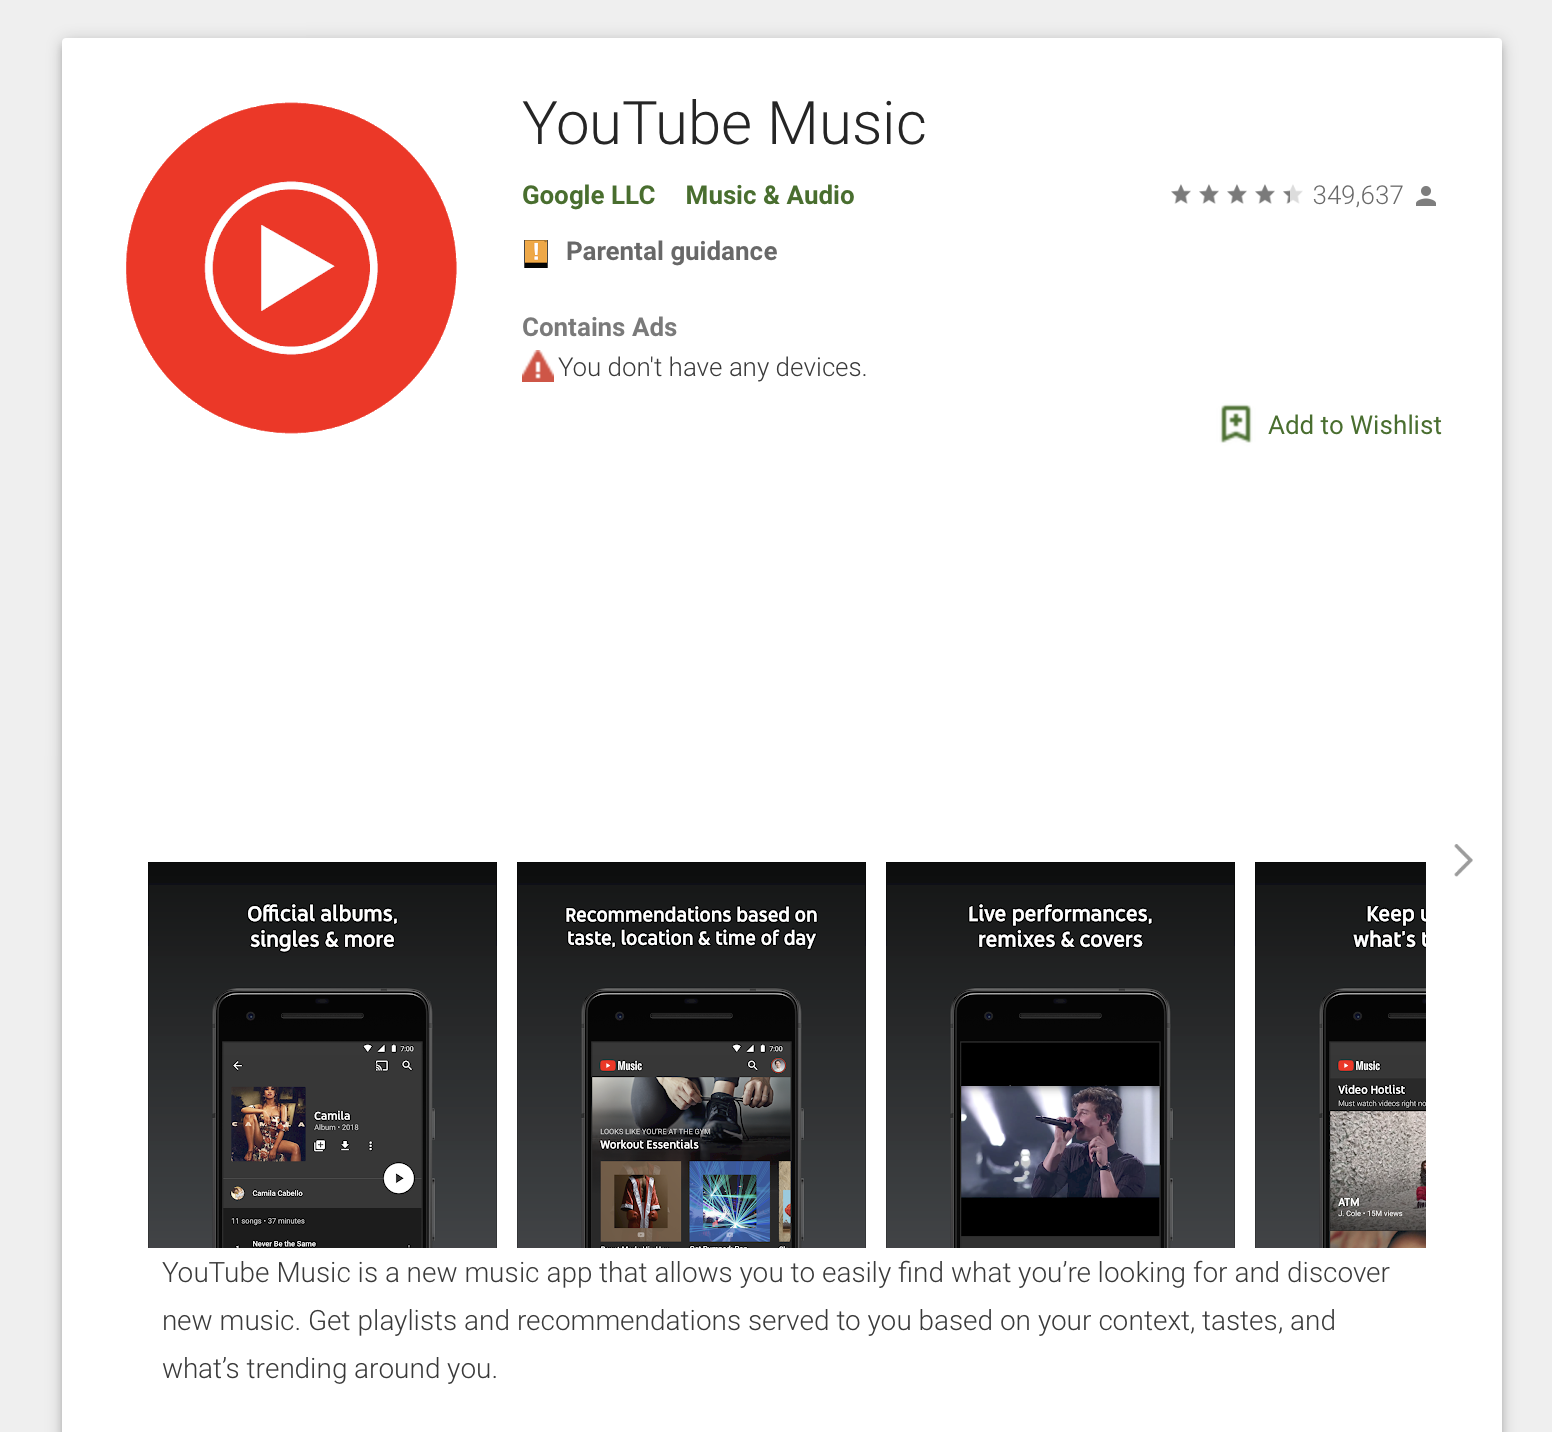 YouTube Music & YouTube Premium Streaming Services Launch Today in 17 ...